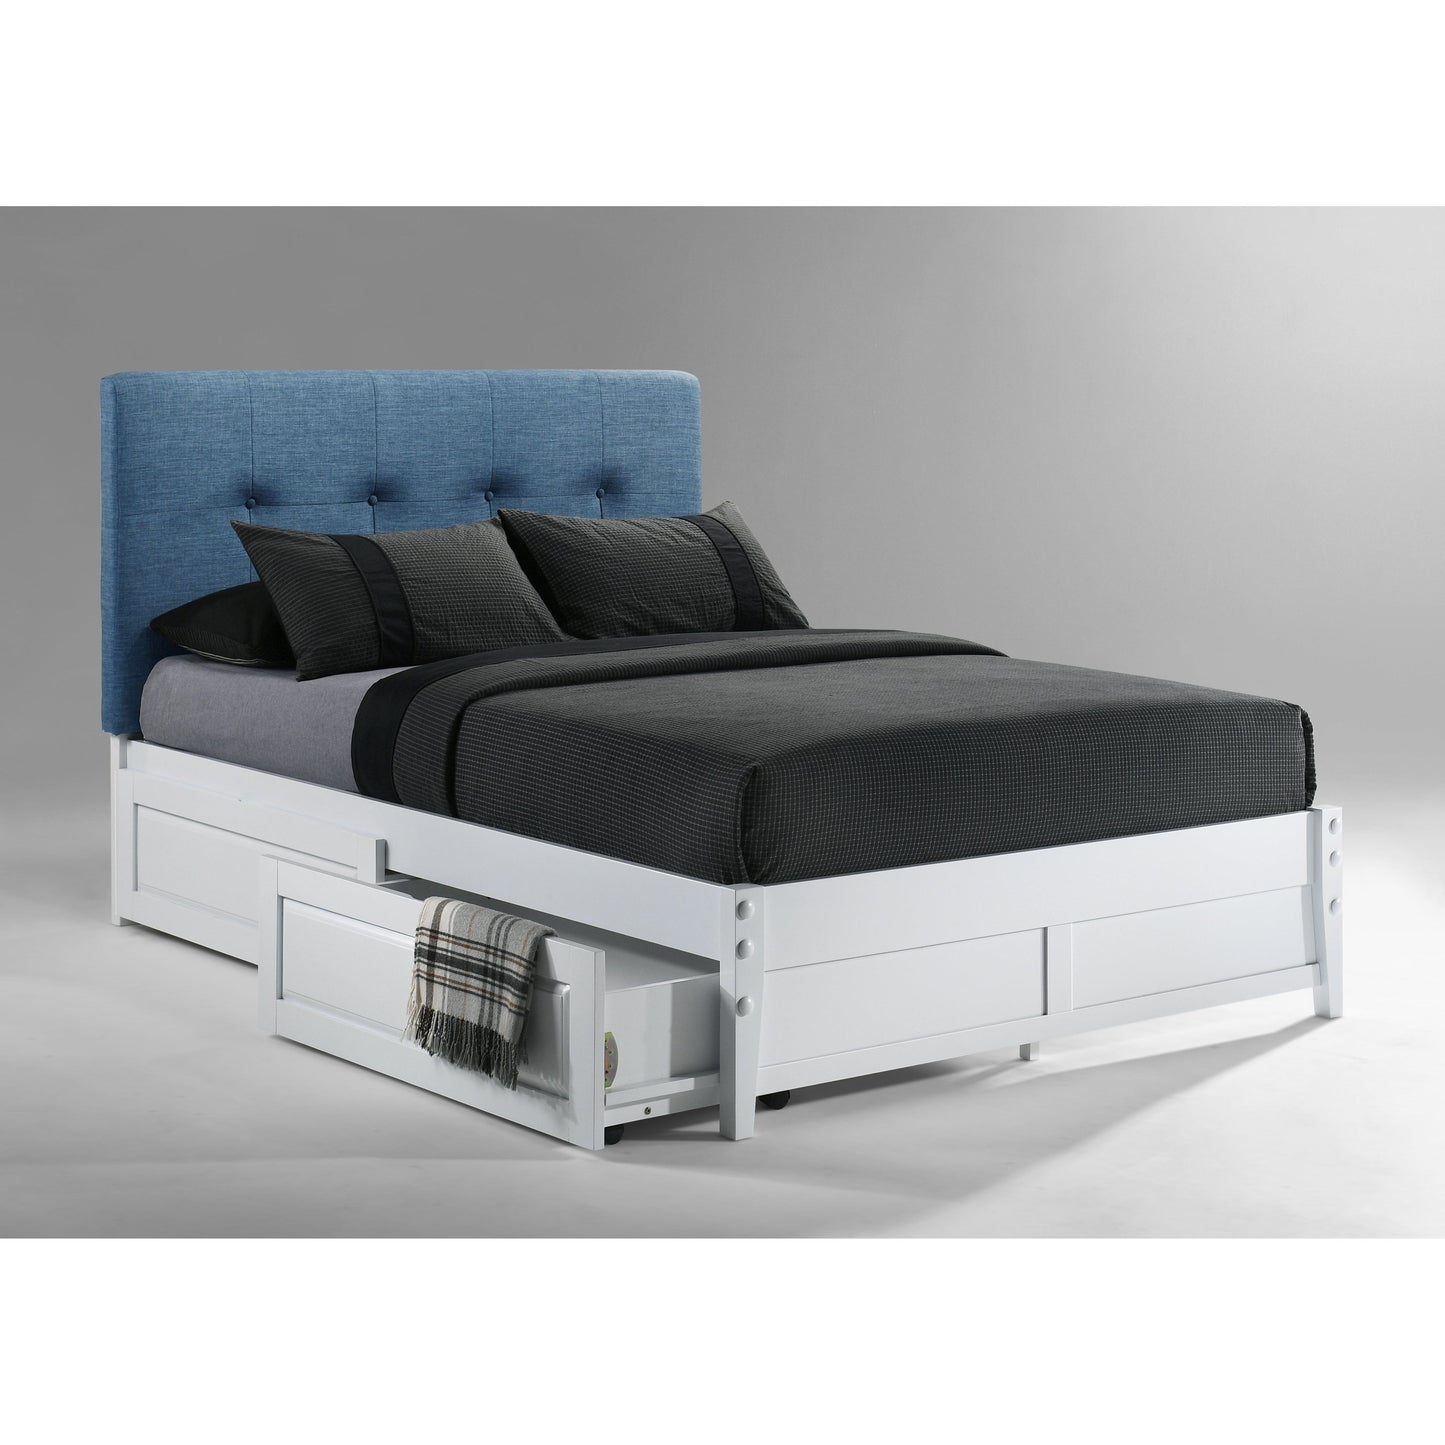 The Bedroom Emporium Paprika Twin Bed in Teal with White Finish Frame (K Series)